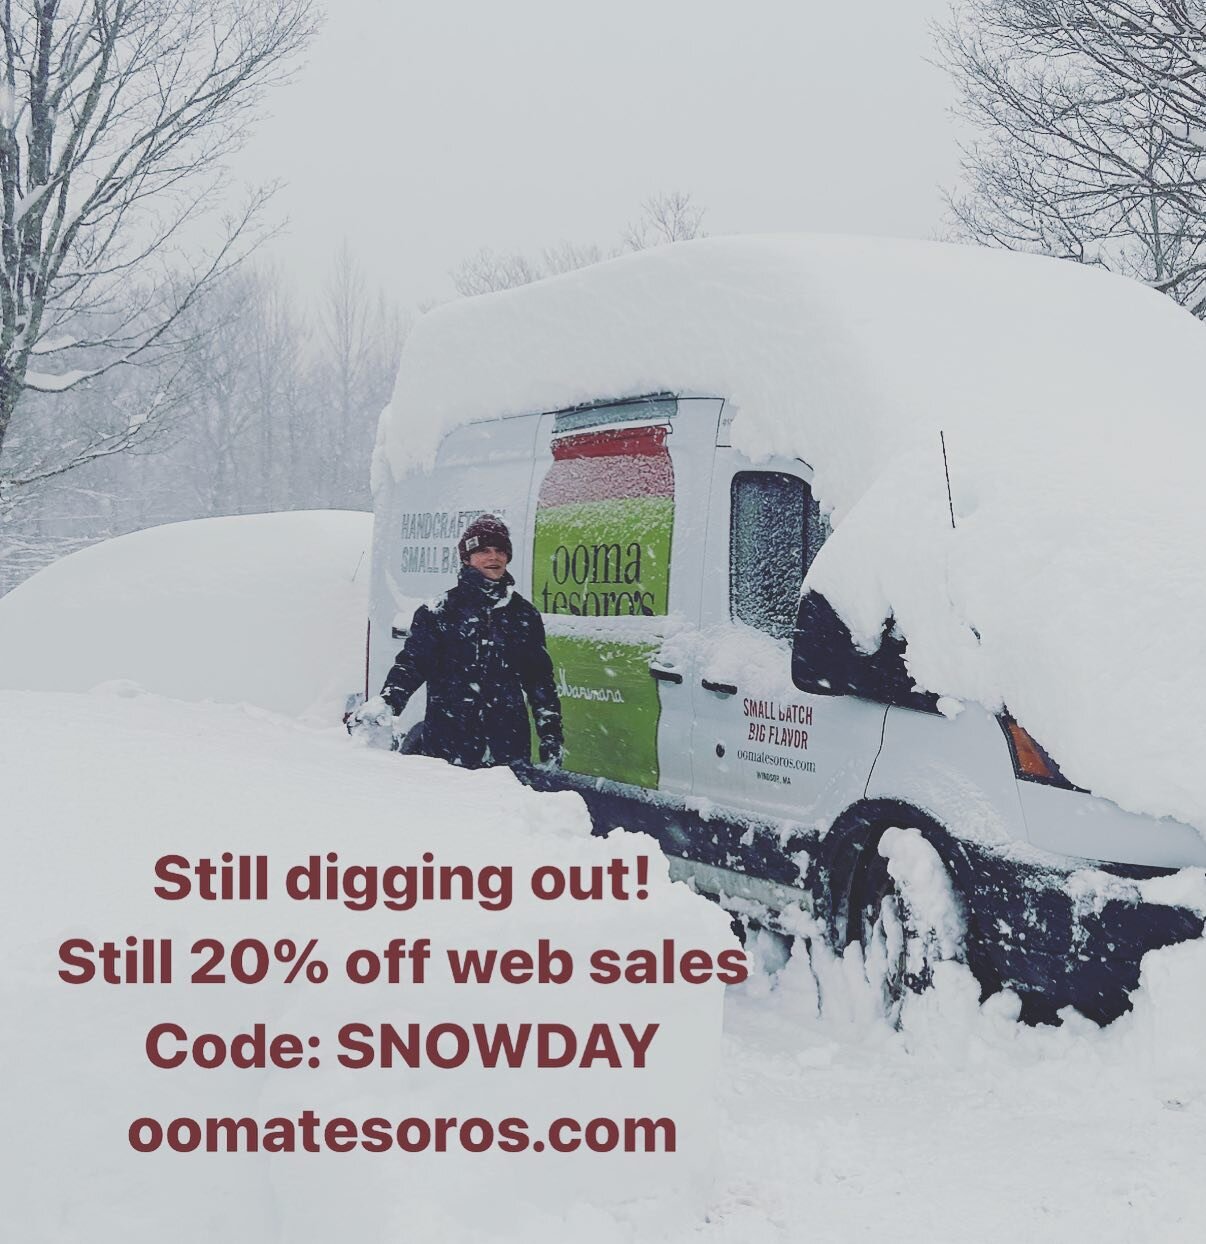 We continue to dig out of the 30&rdquo; of snow! That means our 20% off code: SNOWDAY is still yours to take. Head over to oomatesoros.com 🍝❄️🍝❄️🍝 #snowday #bestjarredmarinara #marinara #snowdaysale #stockyourpantry #pantryjewel #intheberkshires